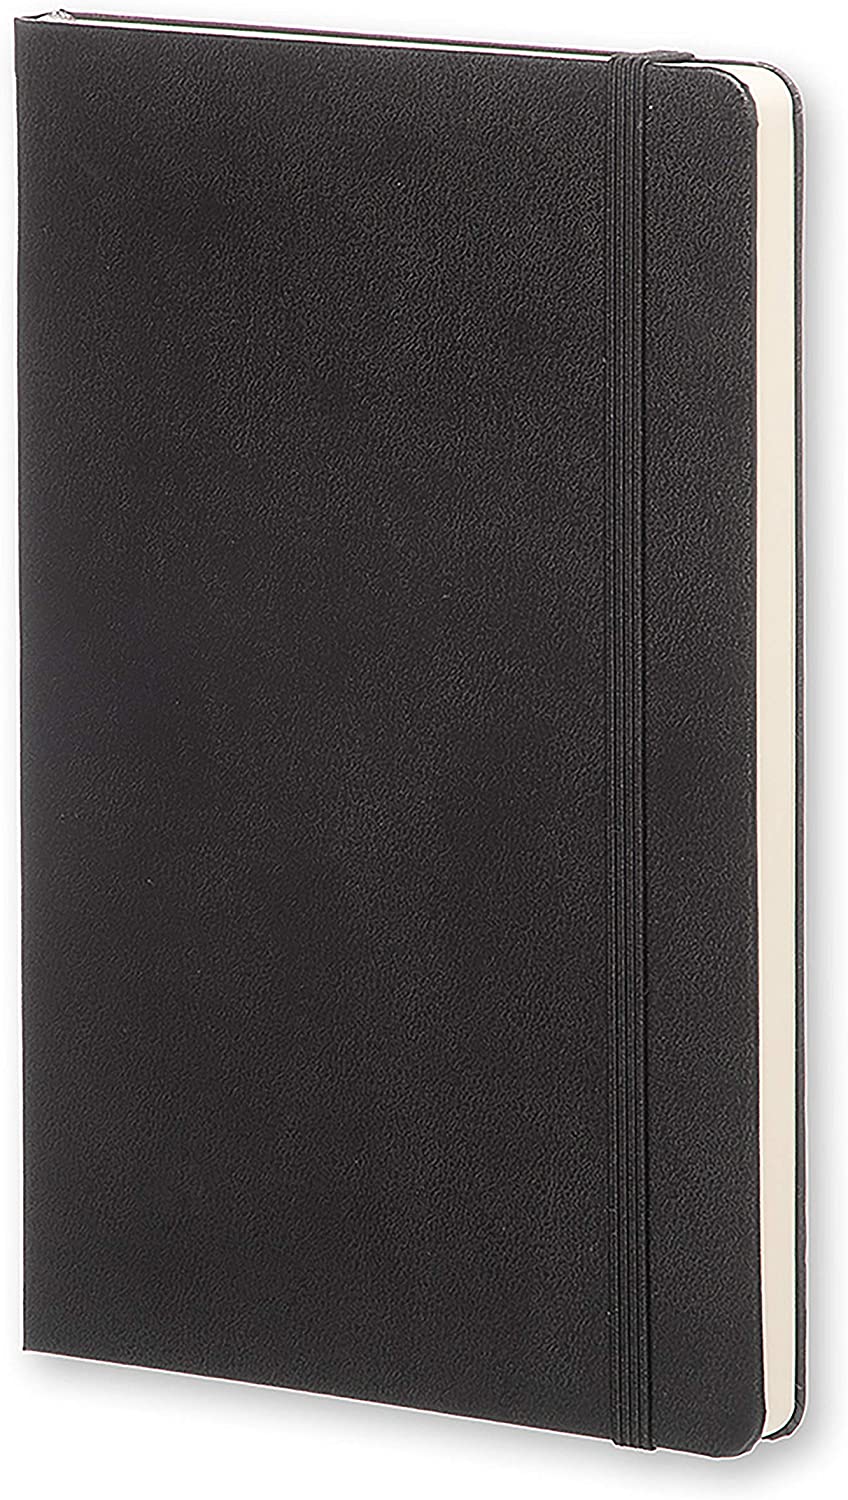 Leather Moleskine notebook with strap